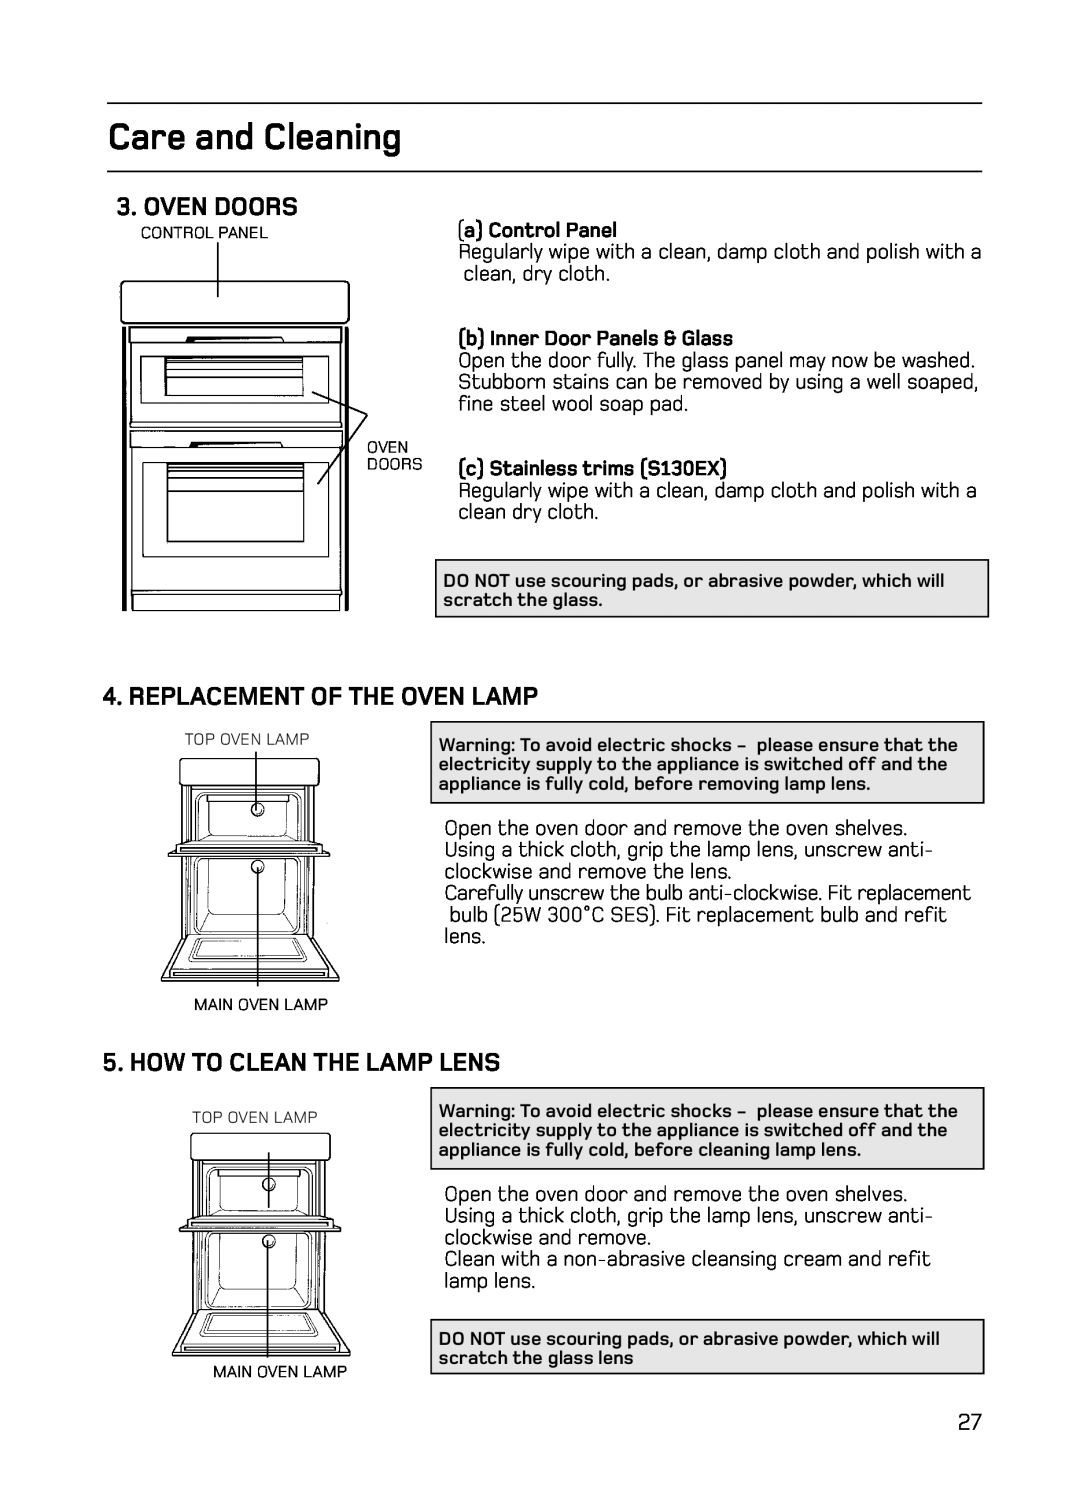 Hotpoint S130E Mk2 manual Oven Doors, Replacement Of The Oven Lamp, How To Clean The Lamp Lens, Care and Cleaning 